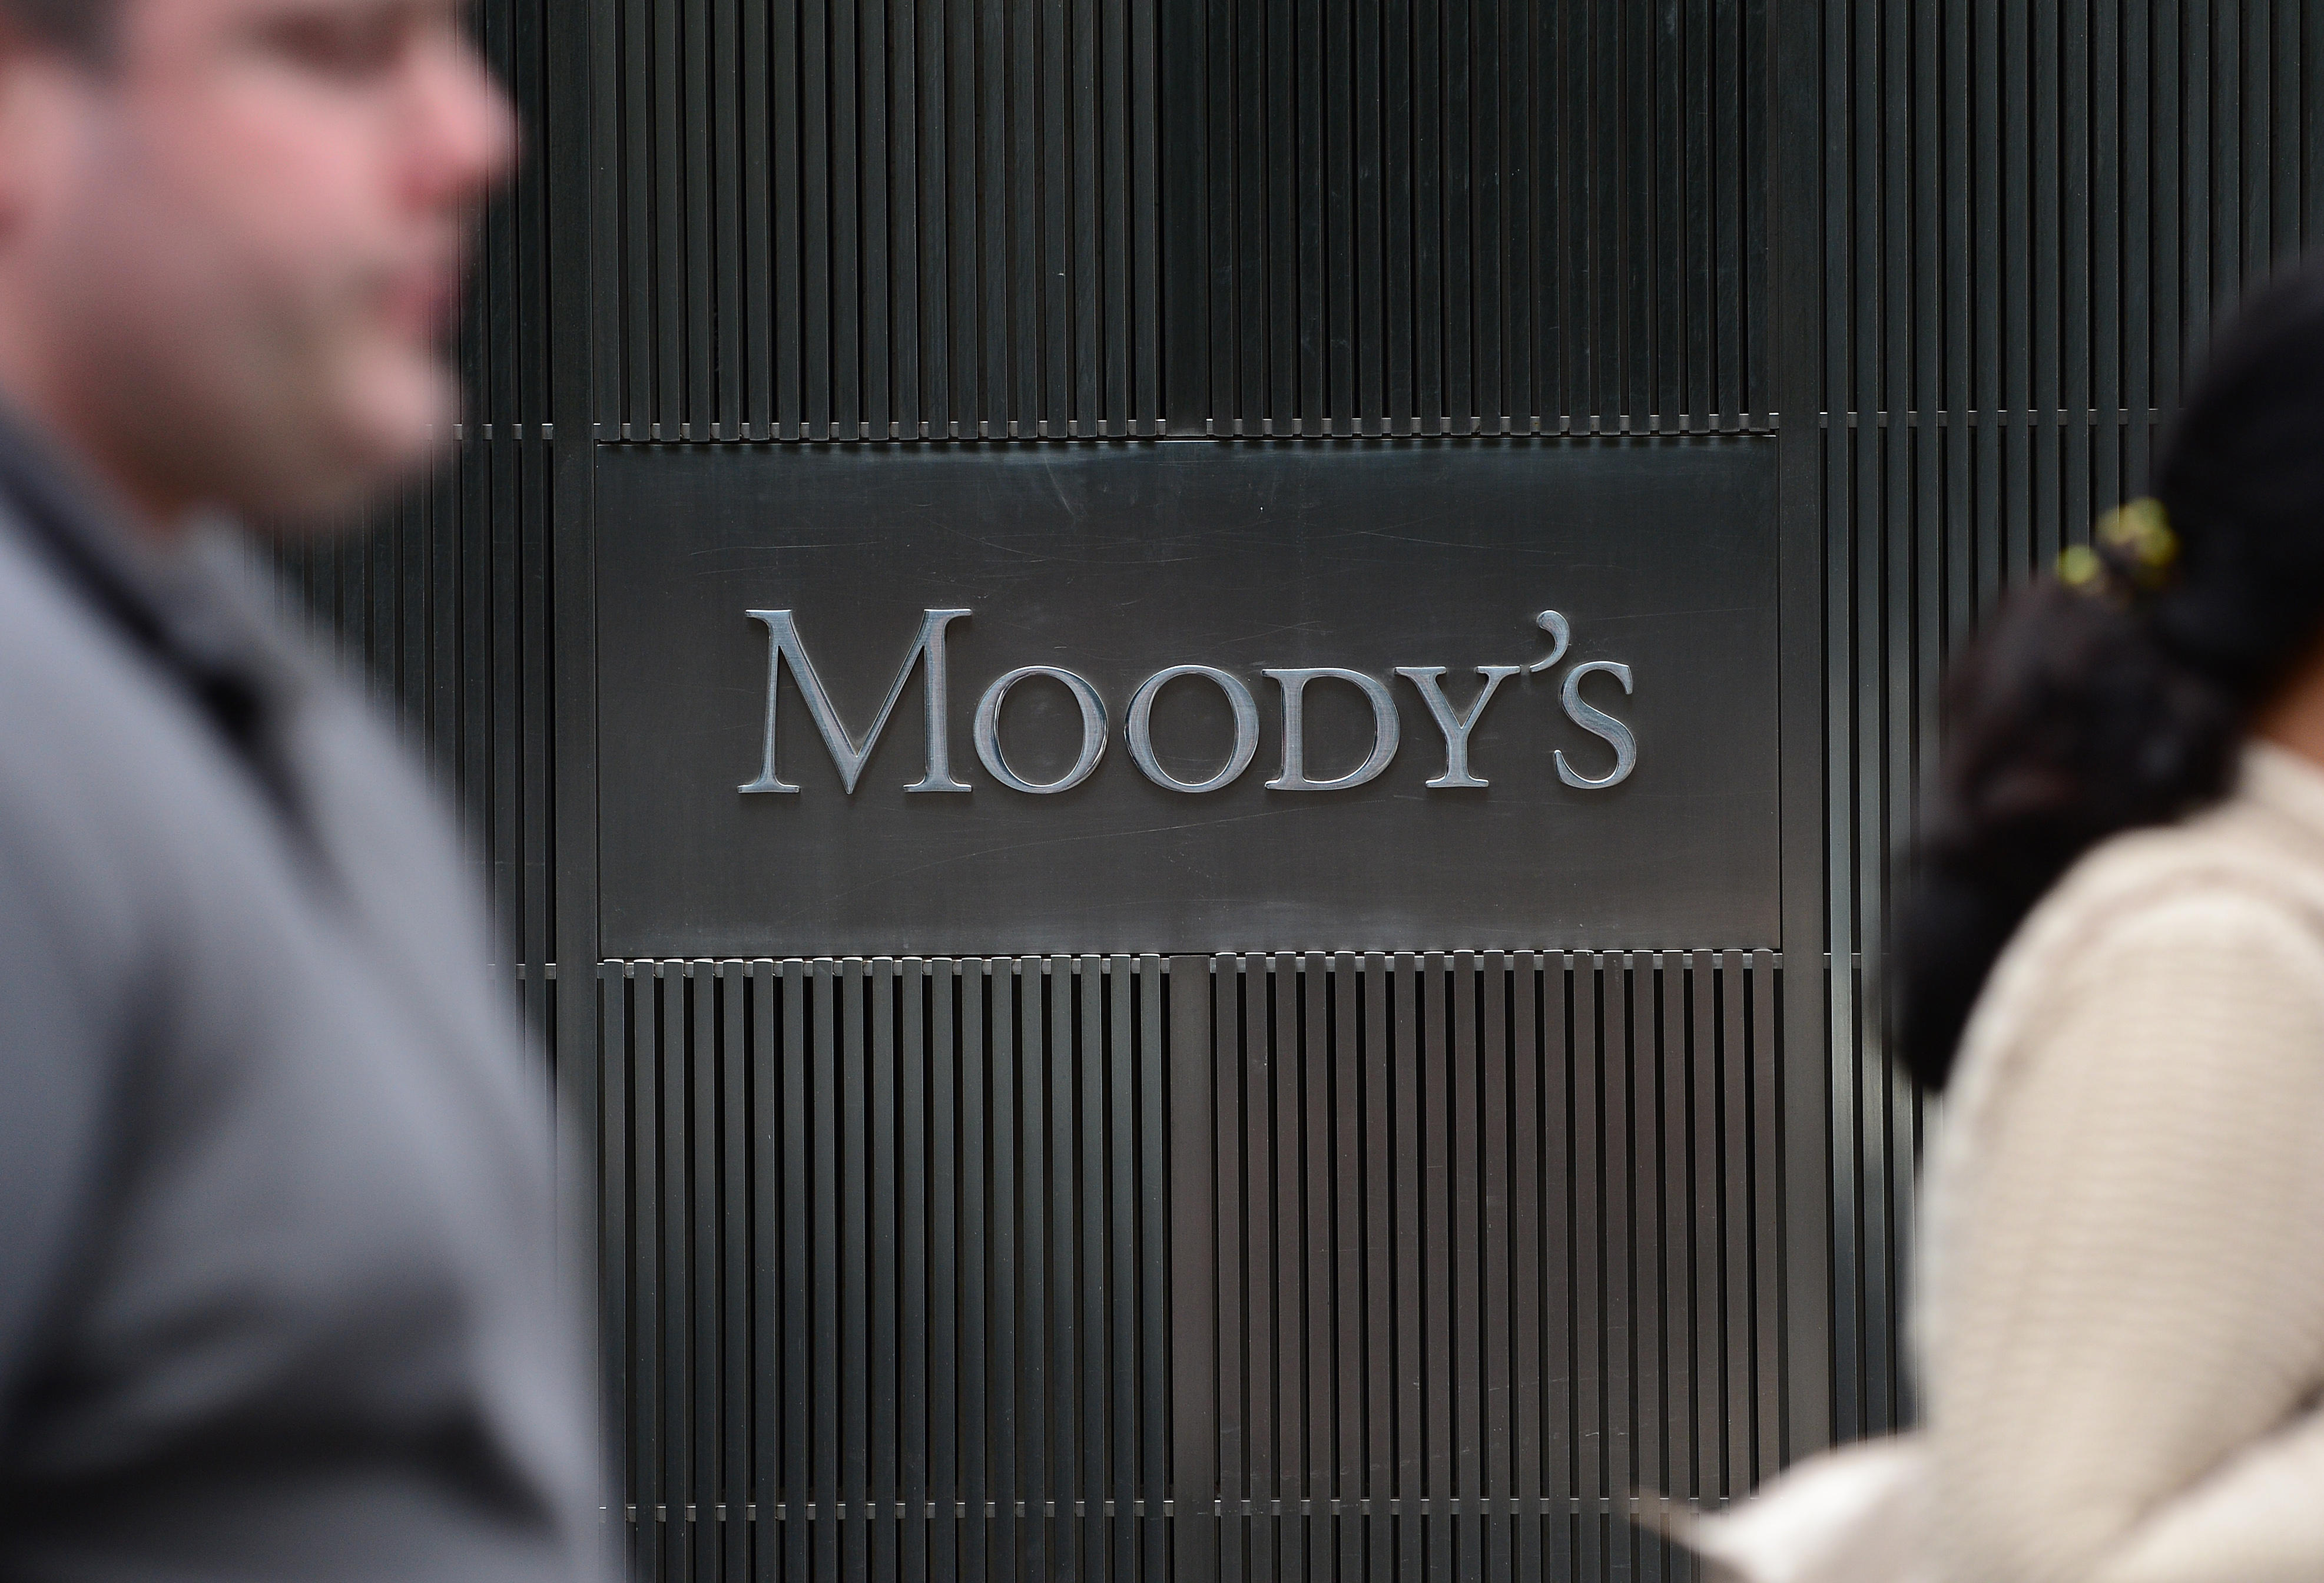 Moody's to pay nearly 864 million to settle claims it inflated ratings